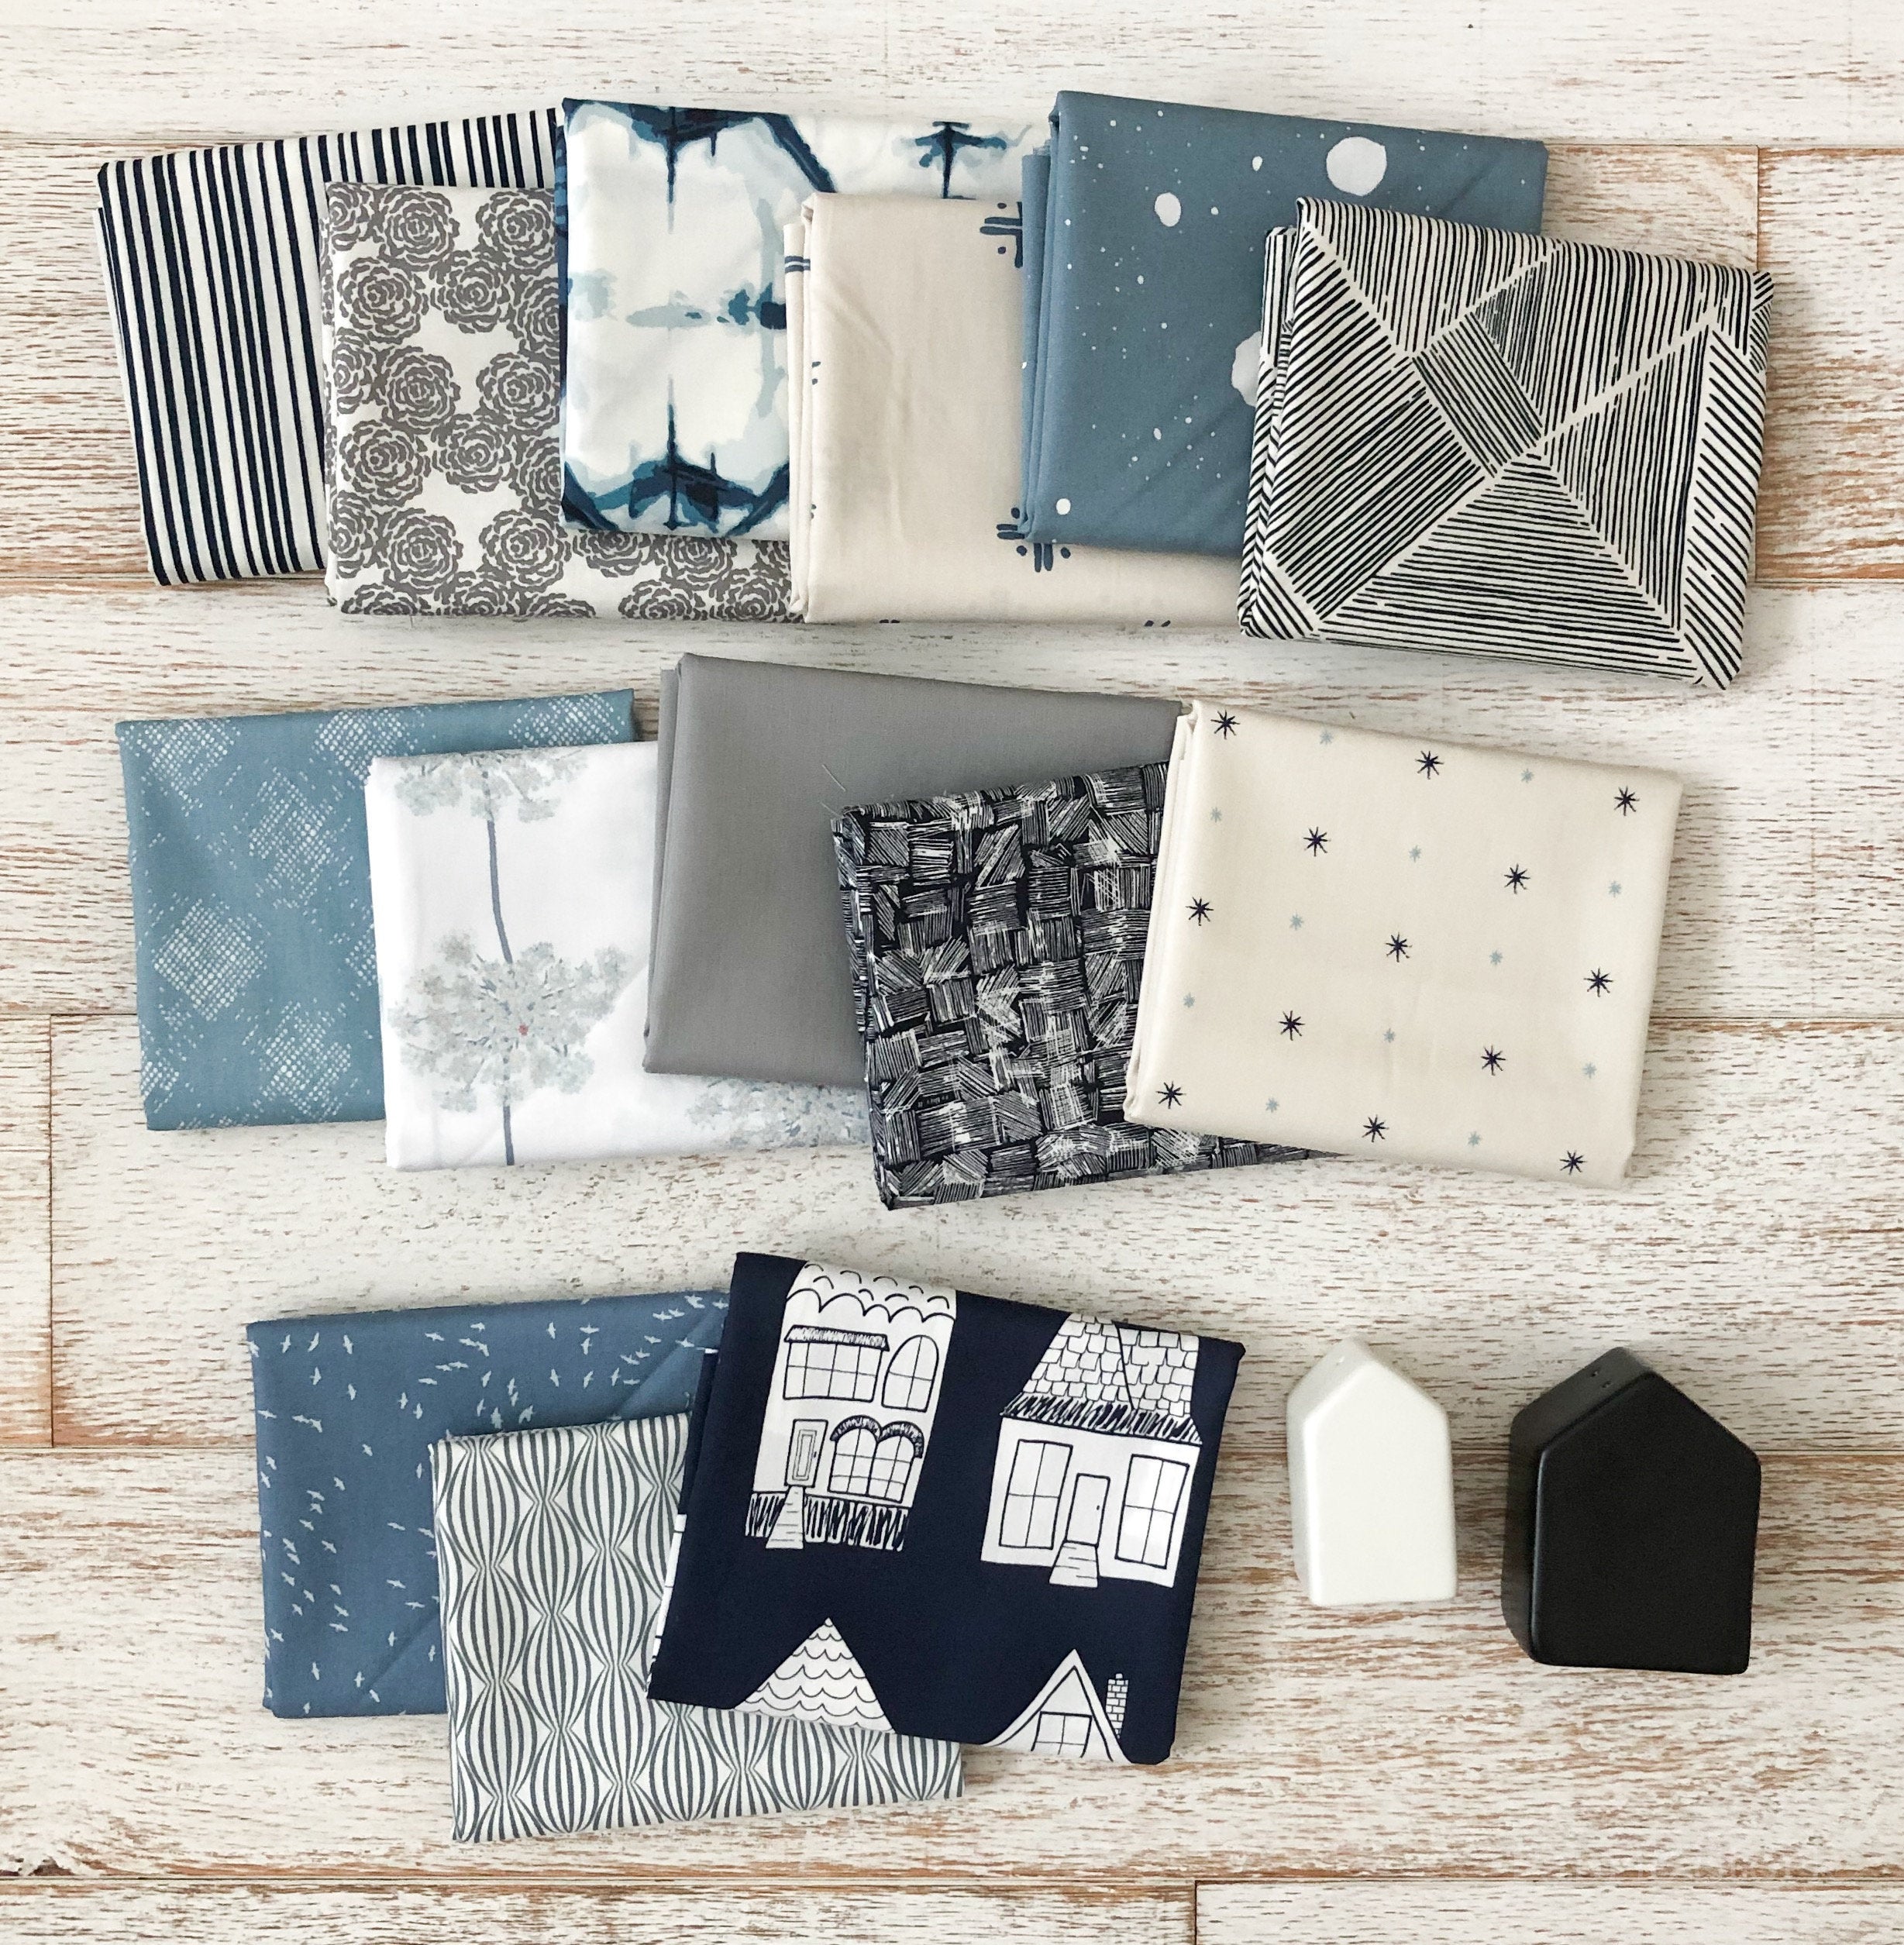 This Great Gatsby inspired Modern Fans quilt kit uses icy blues, grays and metallic silver fabric to bring elegance and pizzazz to a cozy quilt. suzyquilts.com #fatquarter